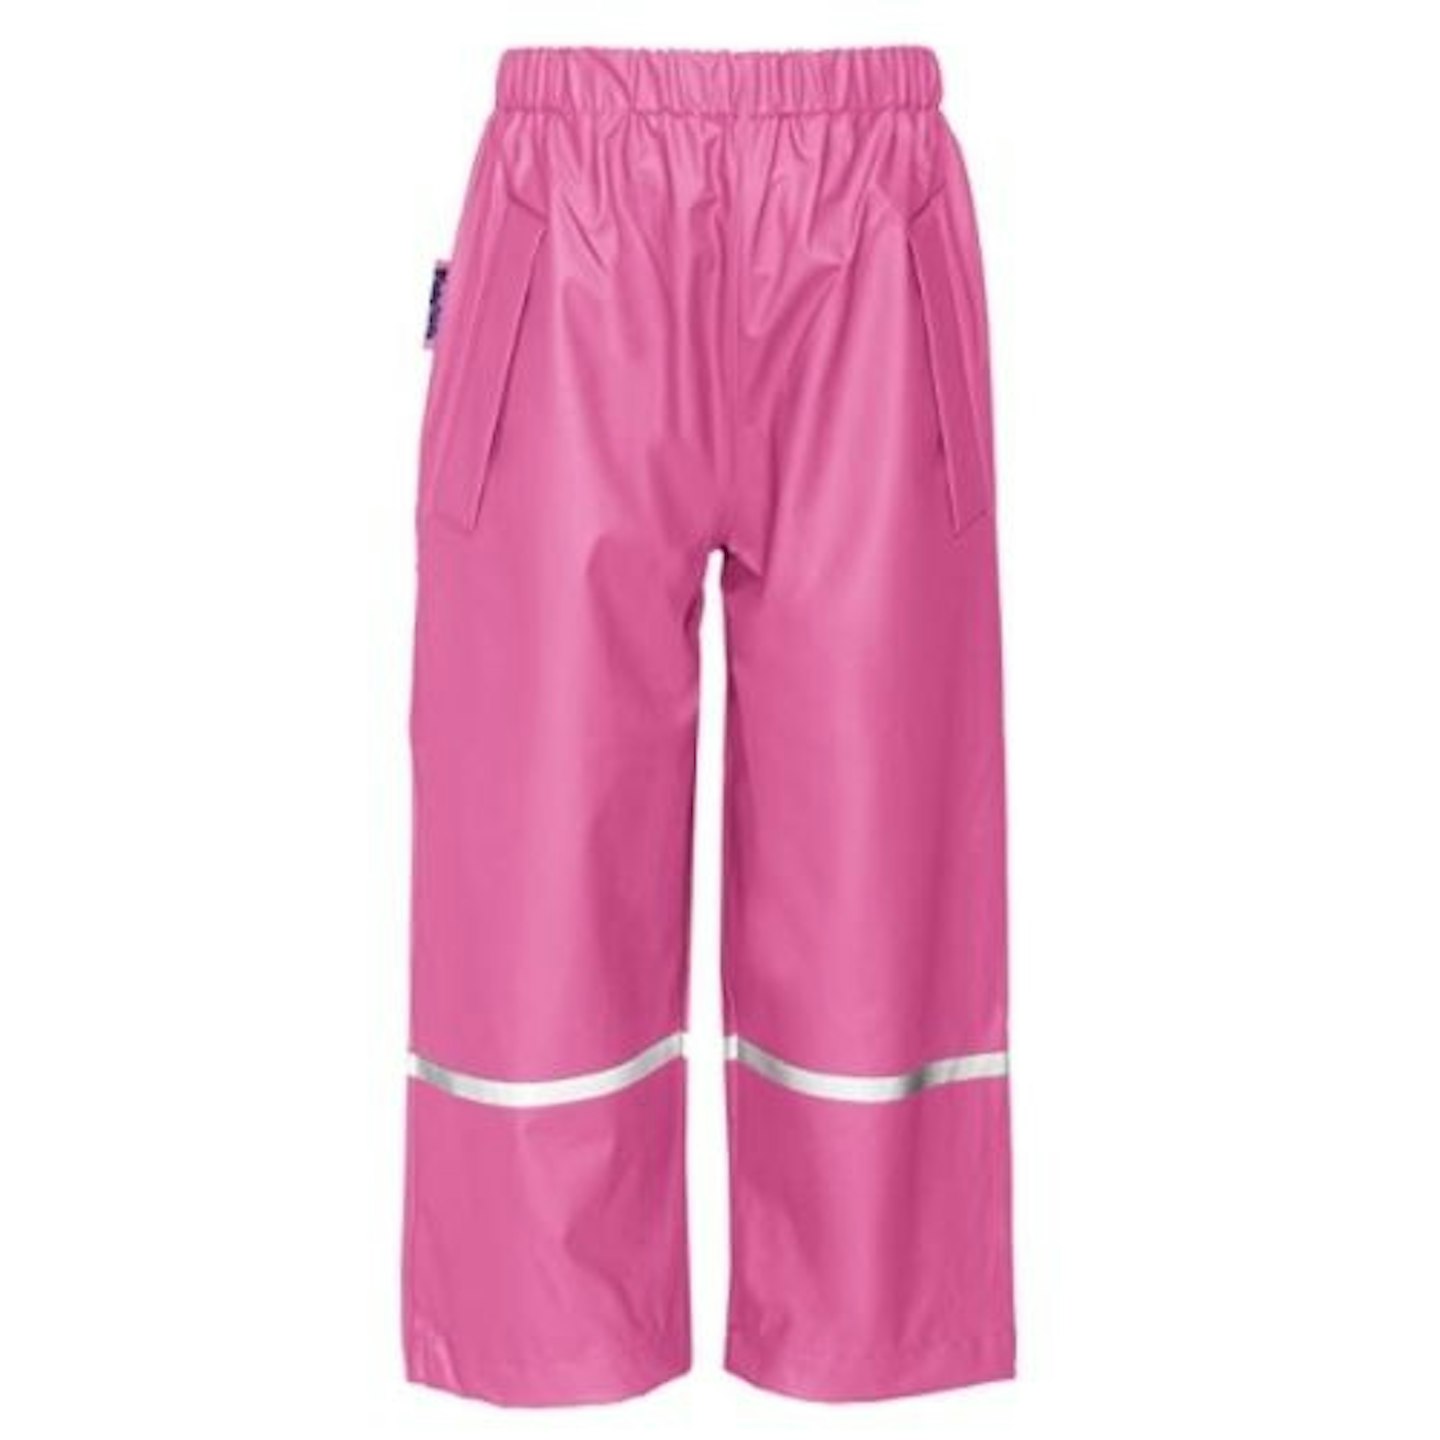 Playshoes - Rain Pants with Fleece lining for kids - Pink